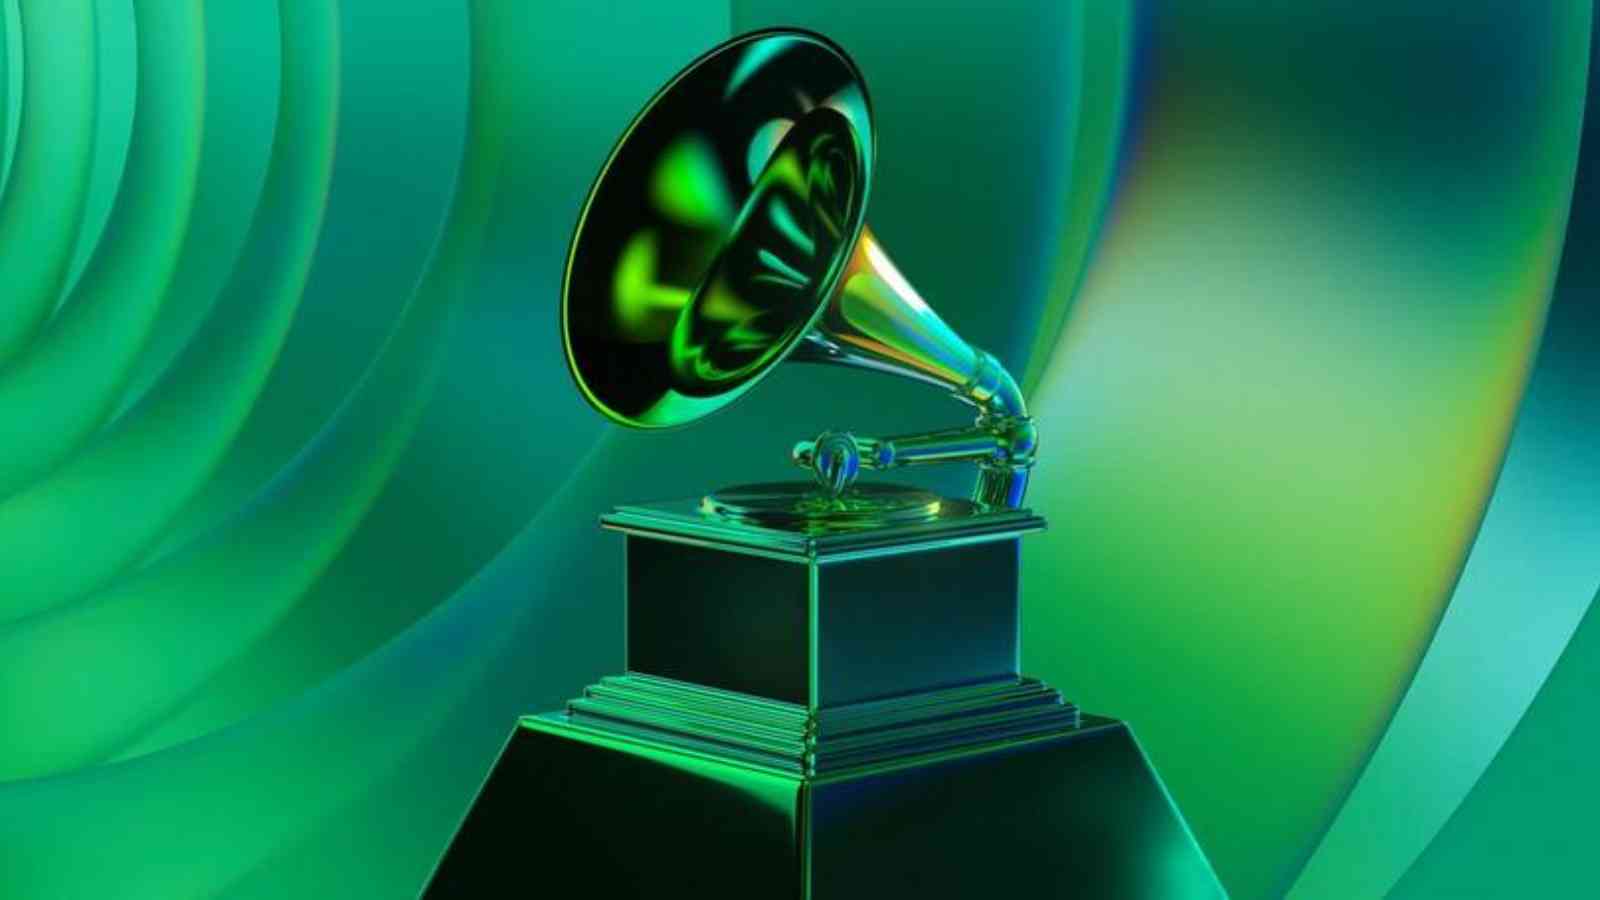 Grammy Awards Day 2023: Date, History, full list of nominees